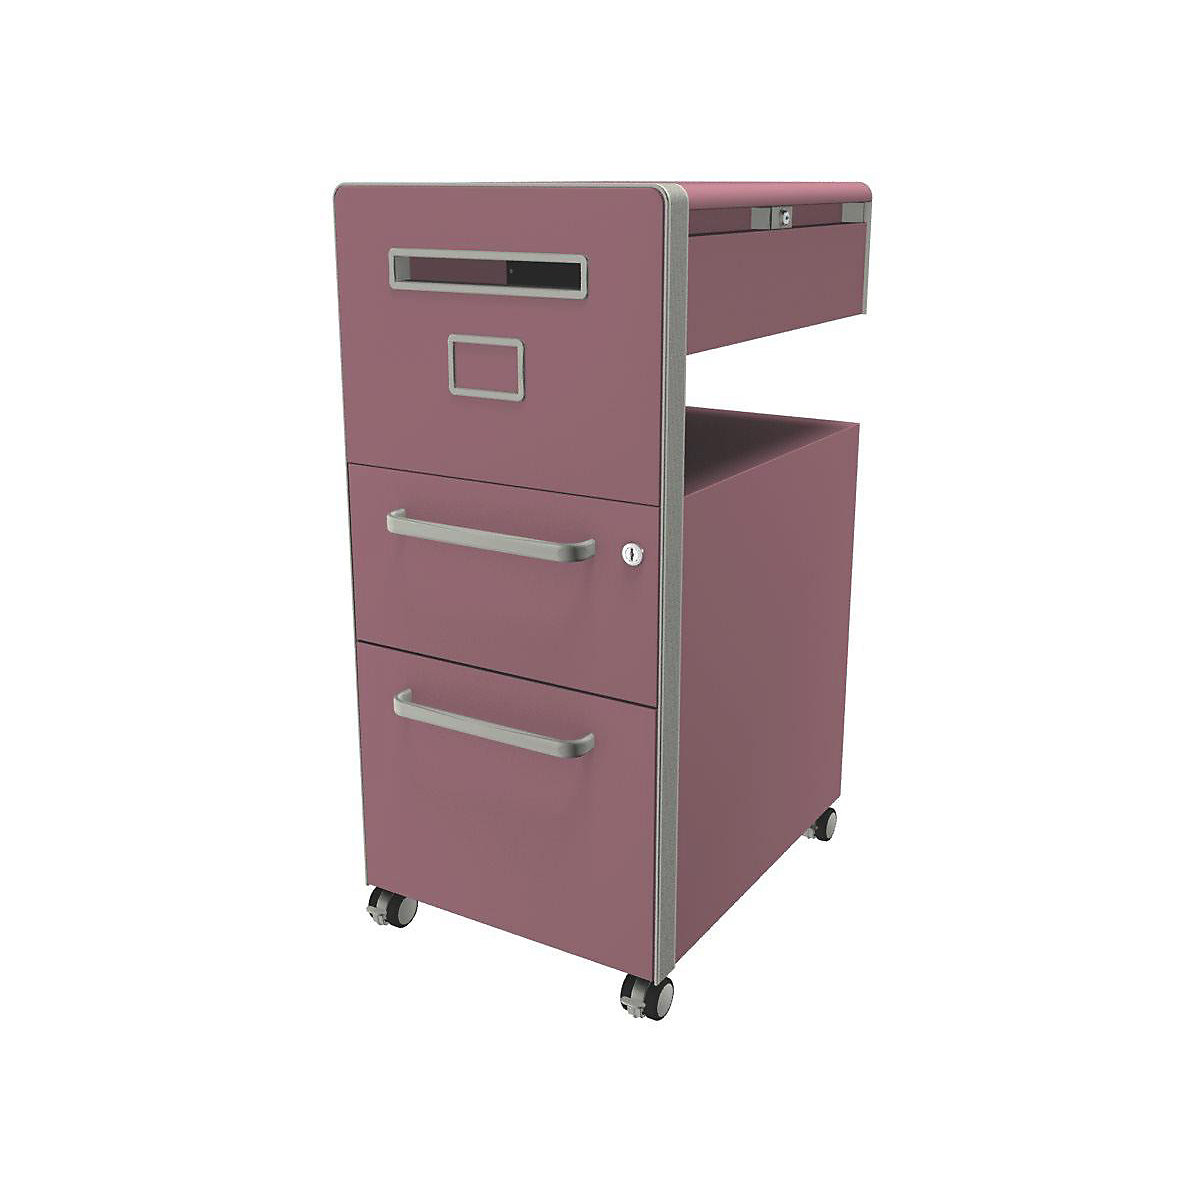 Bite™ pedestal furniture, with 1 pin board, opens on the left side - BISLEY